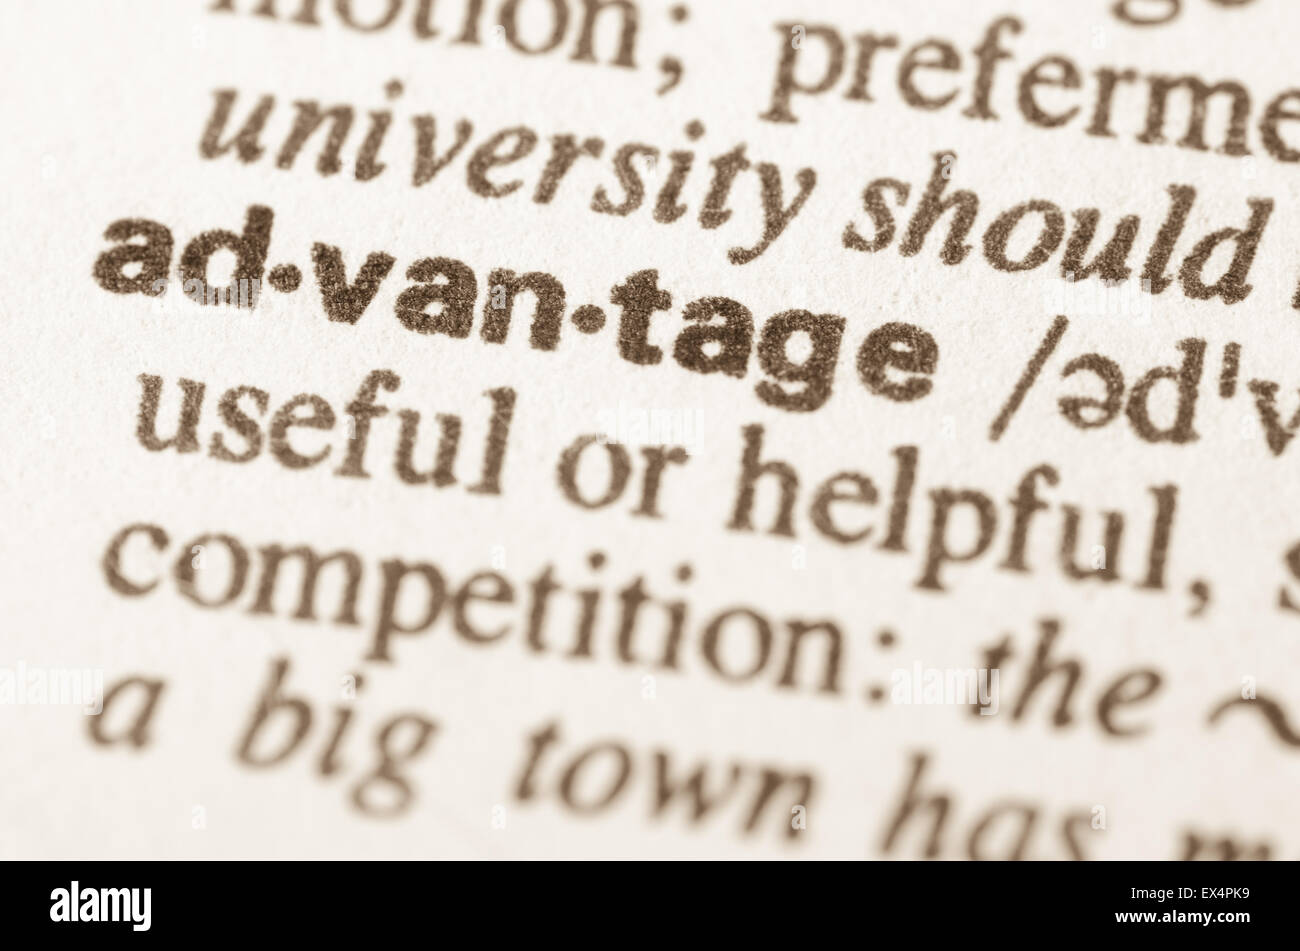 Definition of word advantage in dictionary Stock Photo